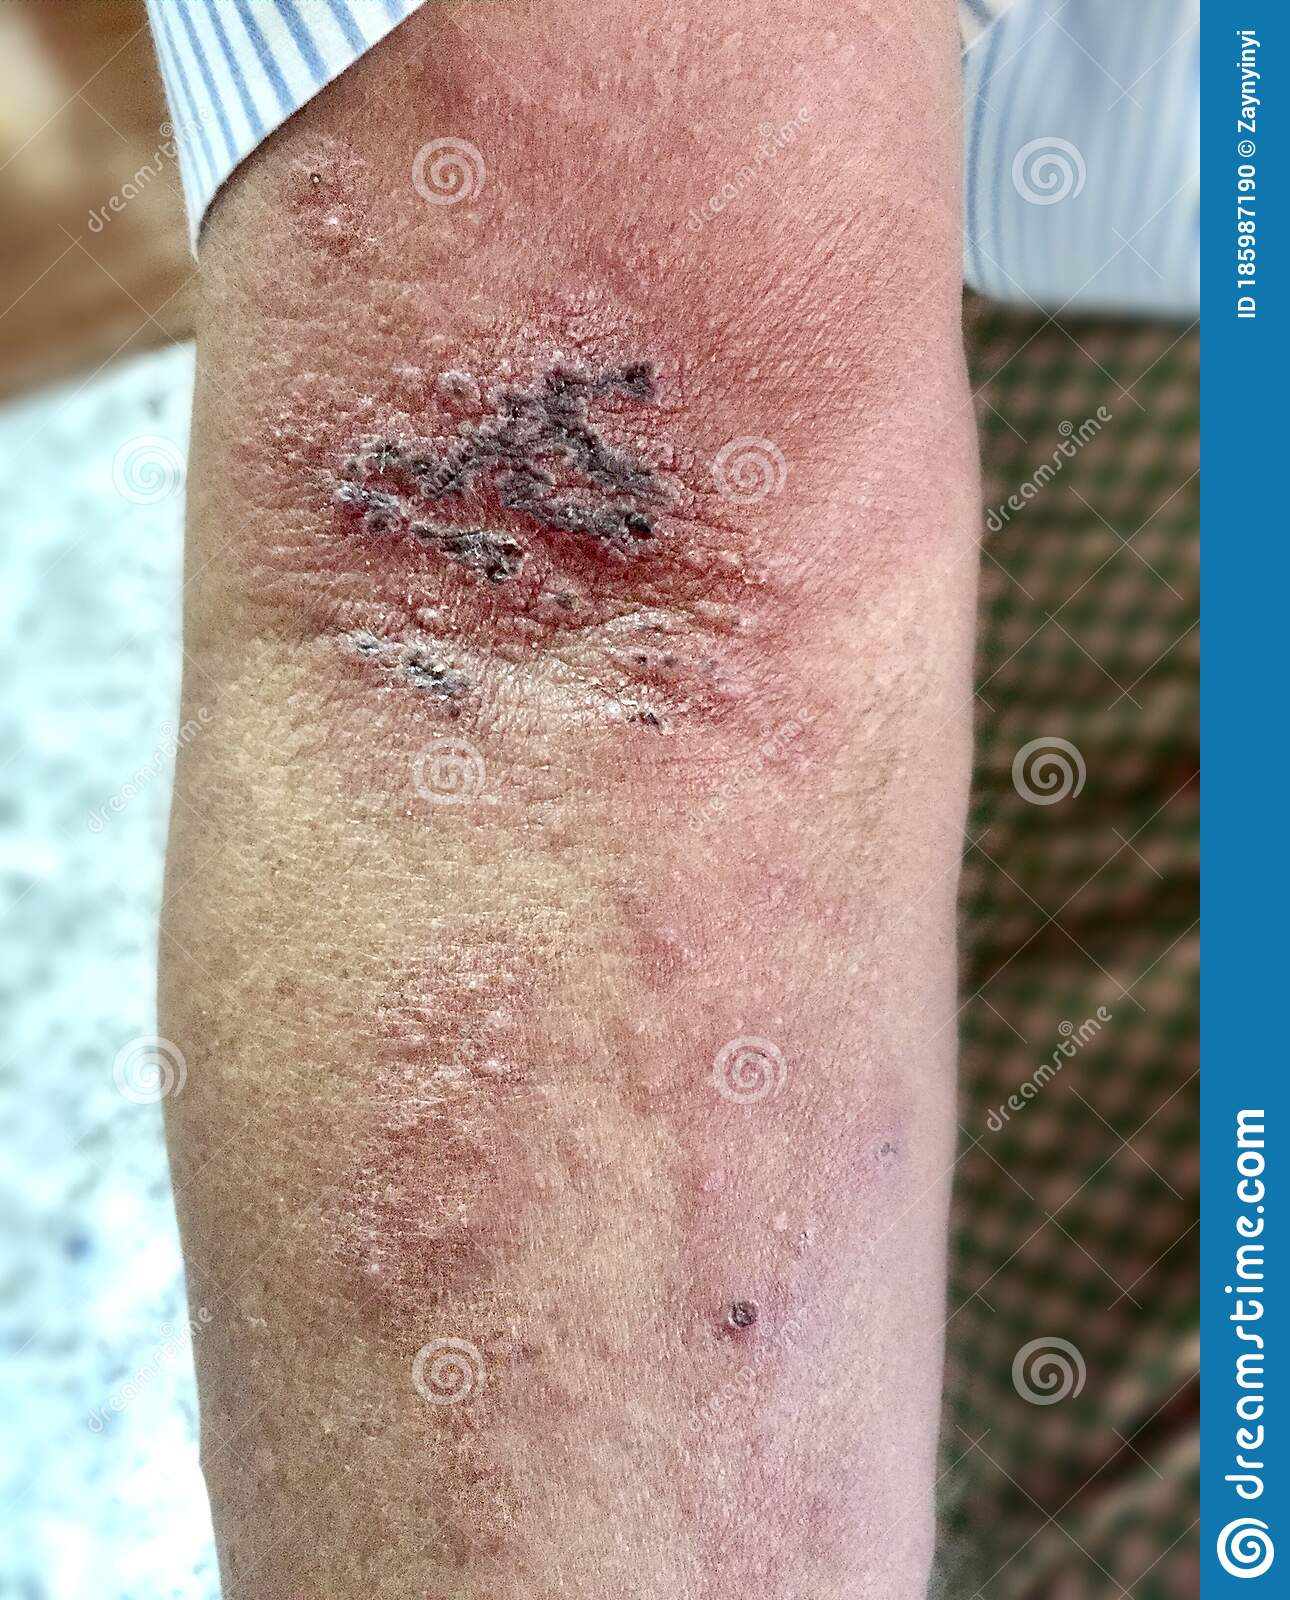 Shingles Or Herpes Zoster Infection In Left Arm Of Southeast Asian ...